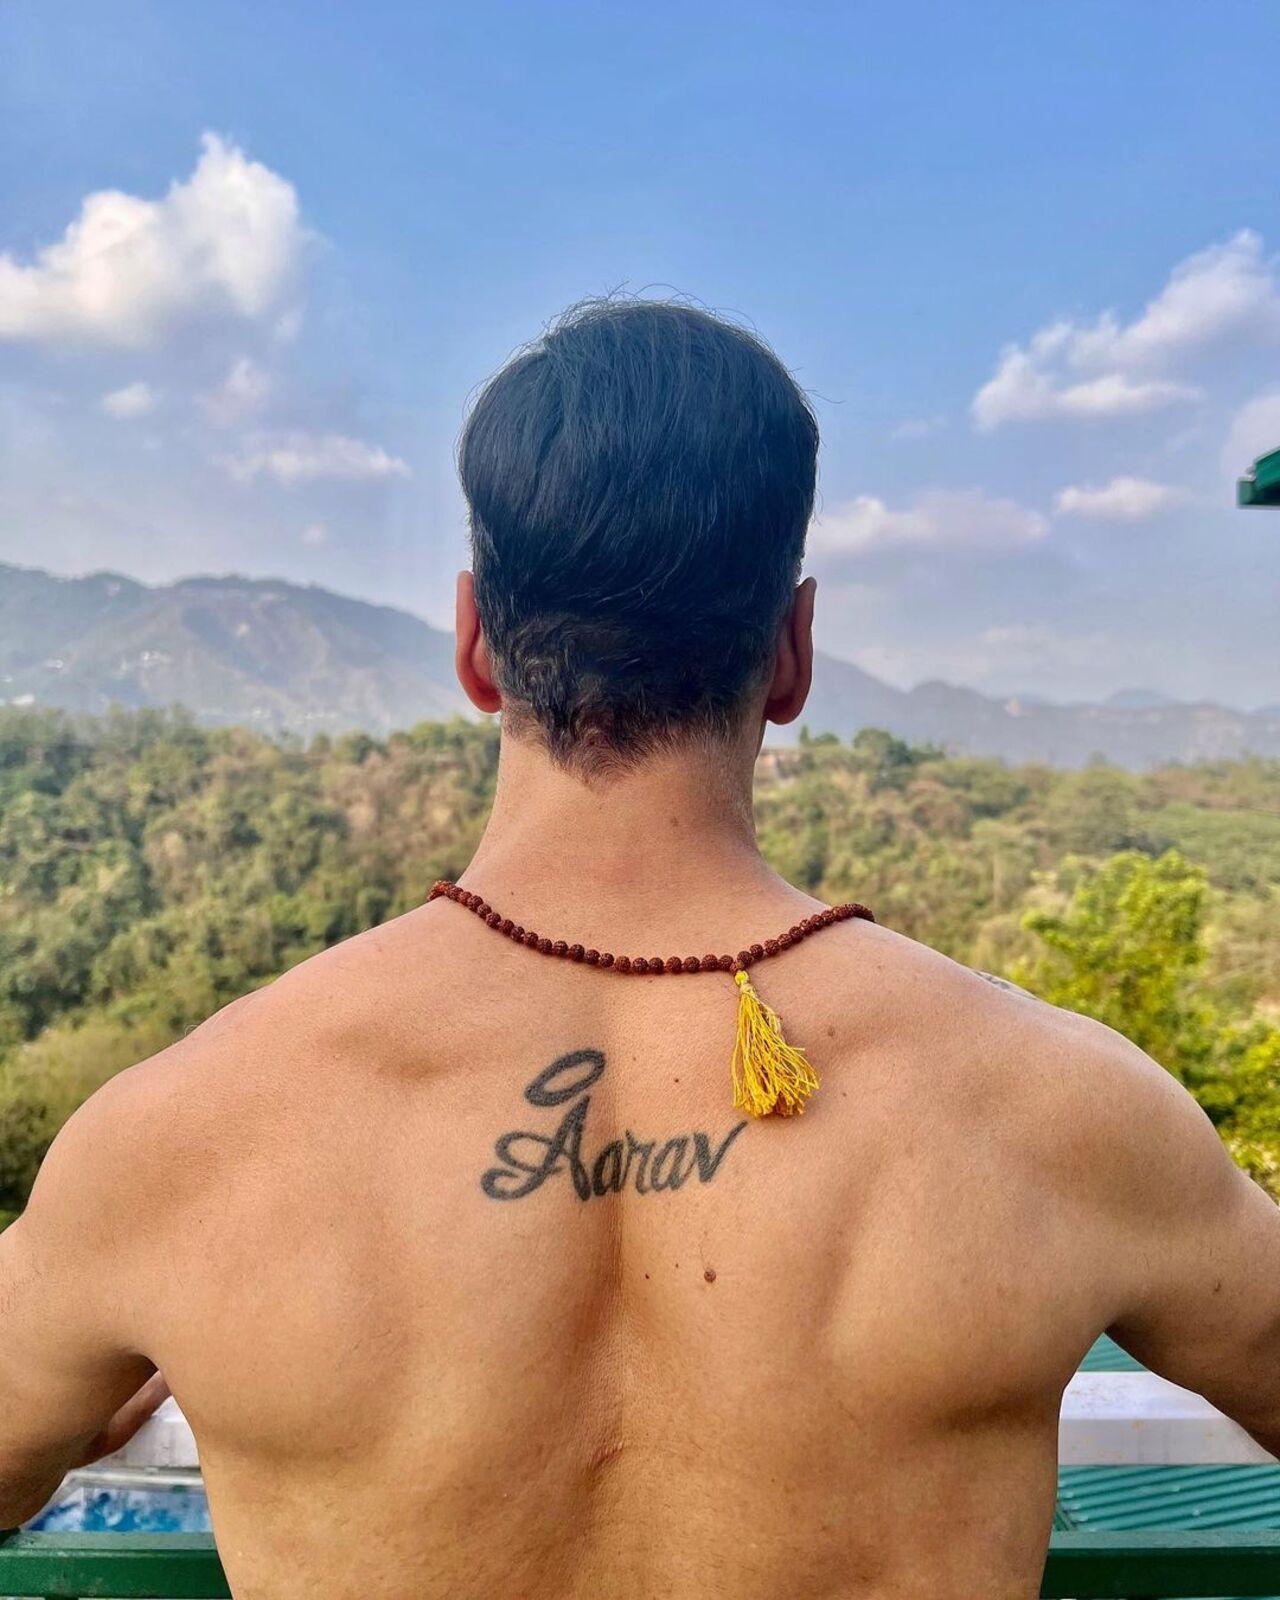 Several years ago, before Nitara's birth, Akshay got Aarav's name tattooed on his back. He often flaunts it in pictures